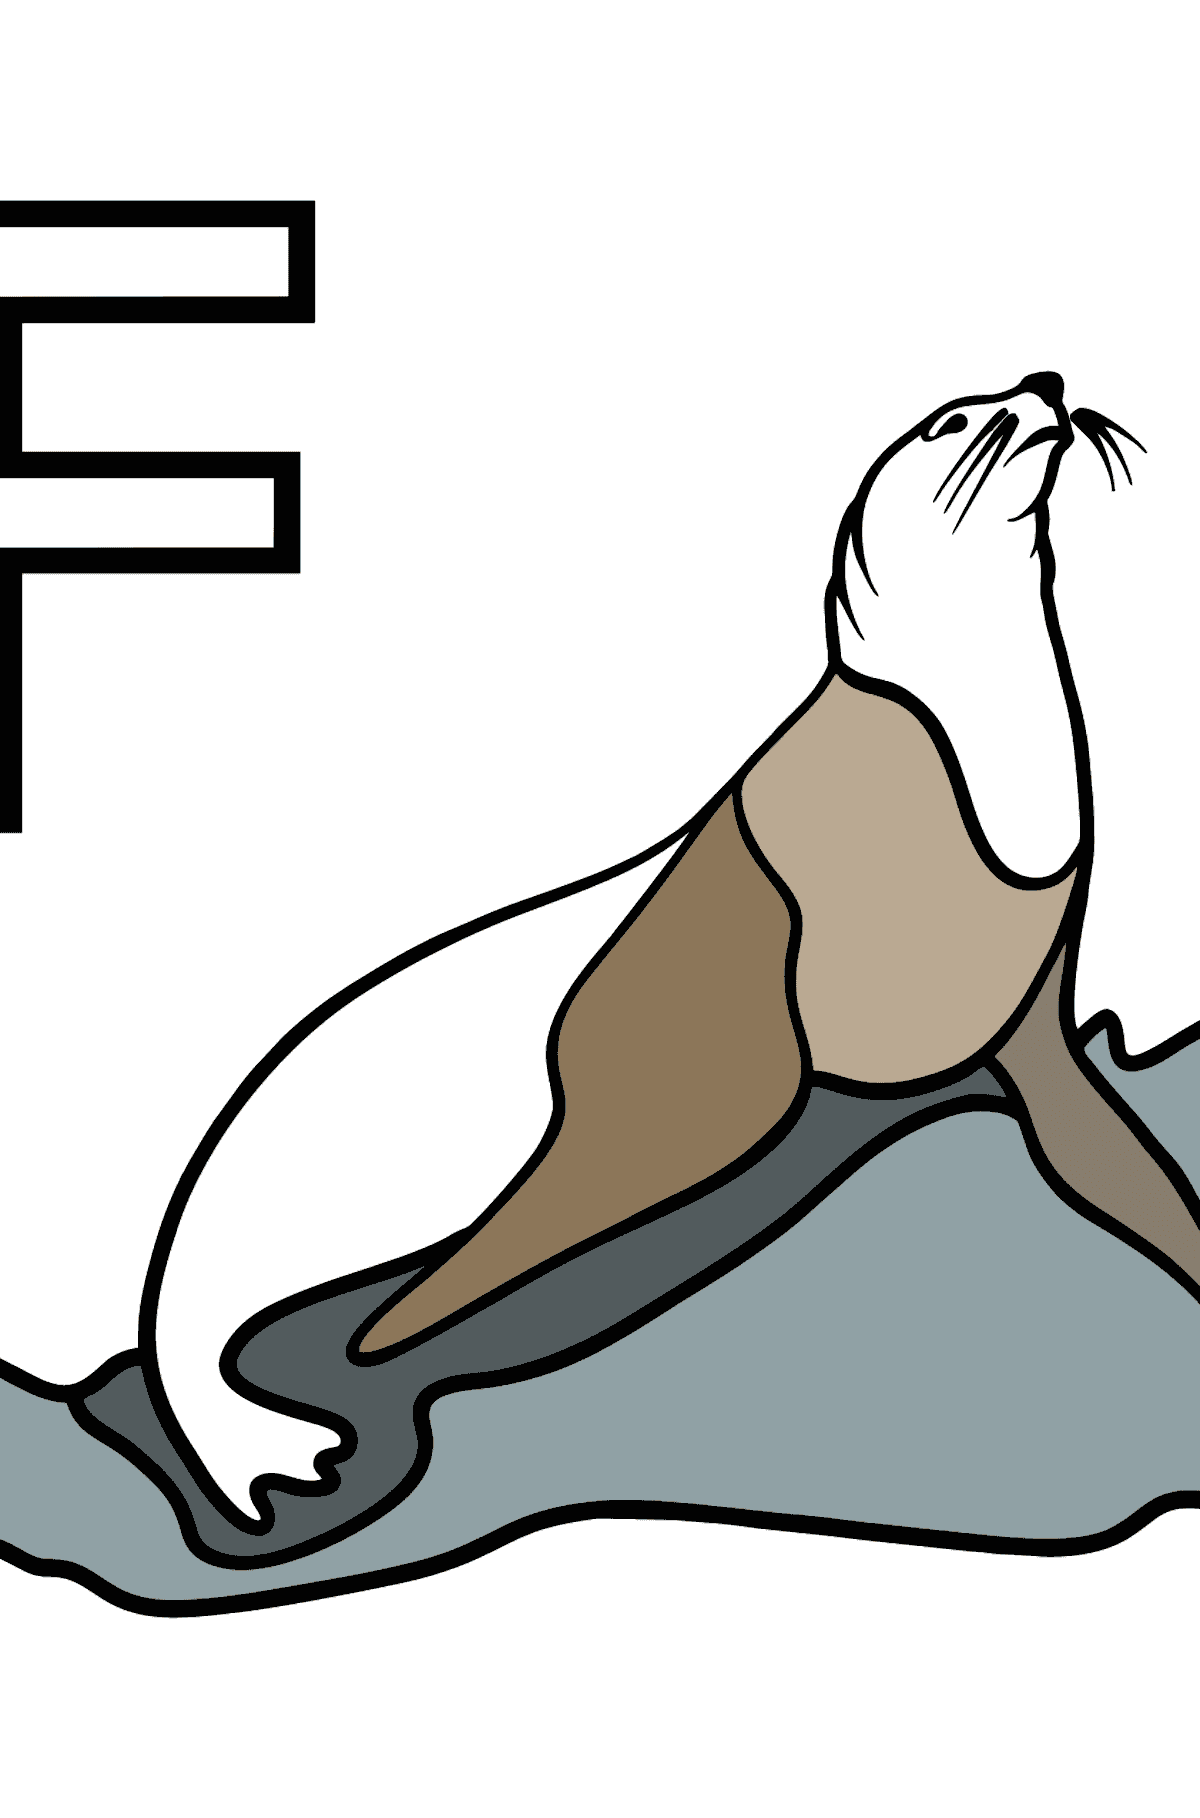 Portuguese Letter F coloring pages - FOCA - Coloring Pages for Kids